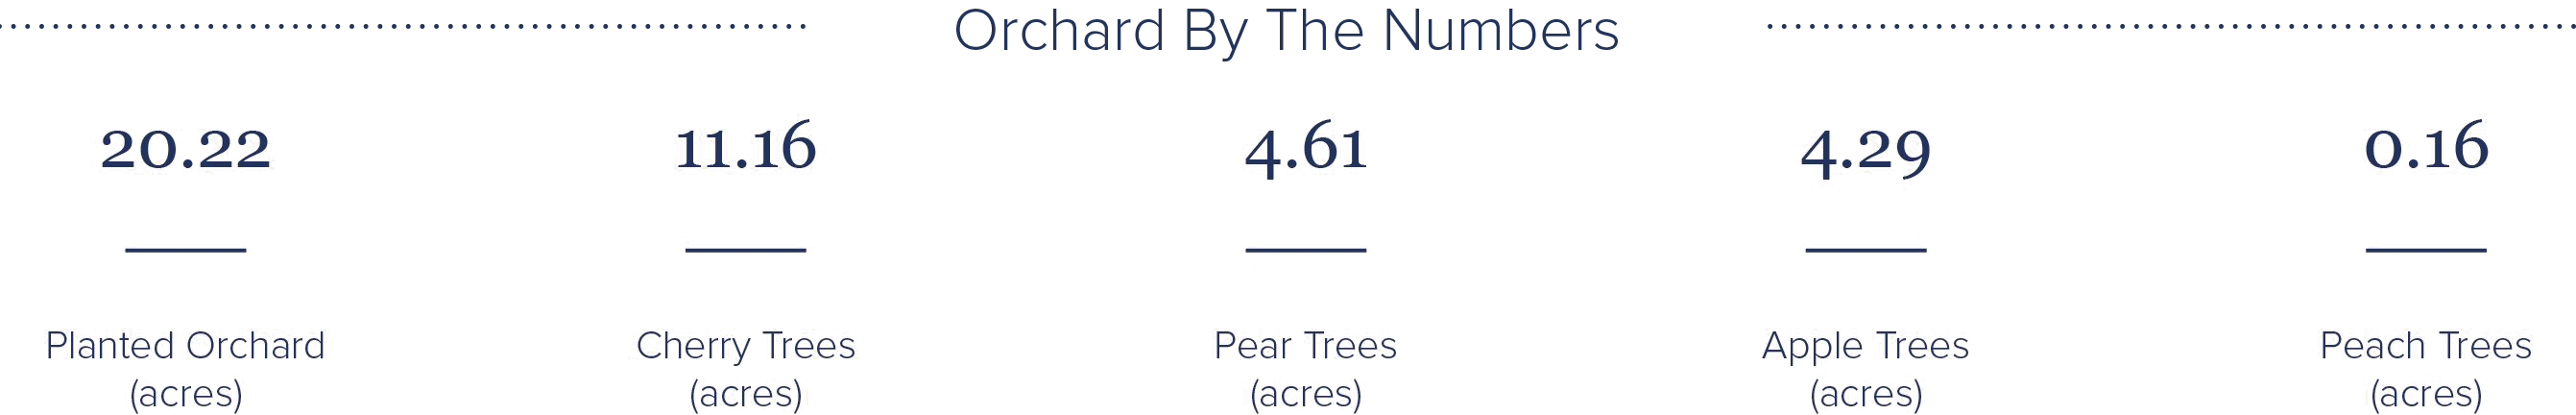 Orchard_By-The-Numbers